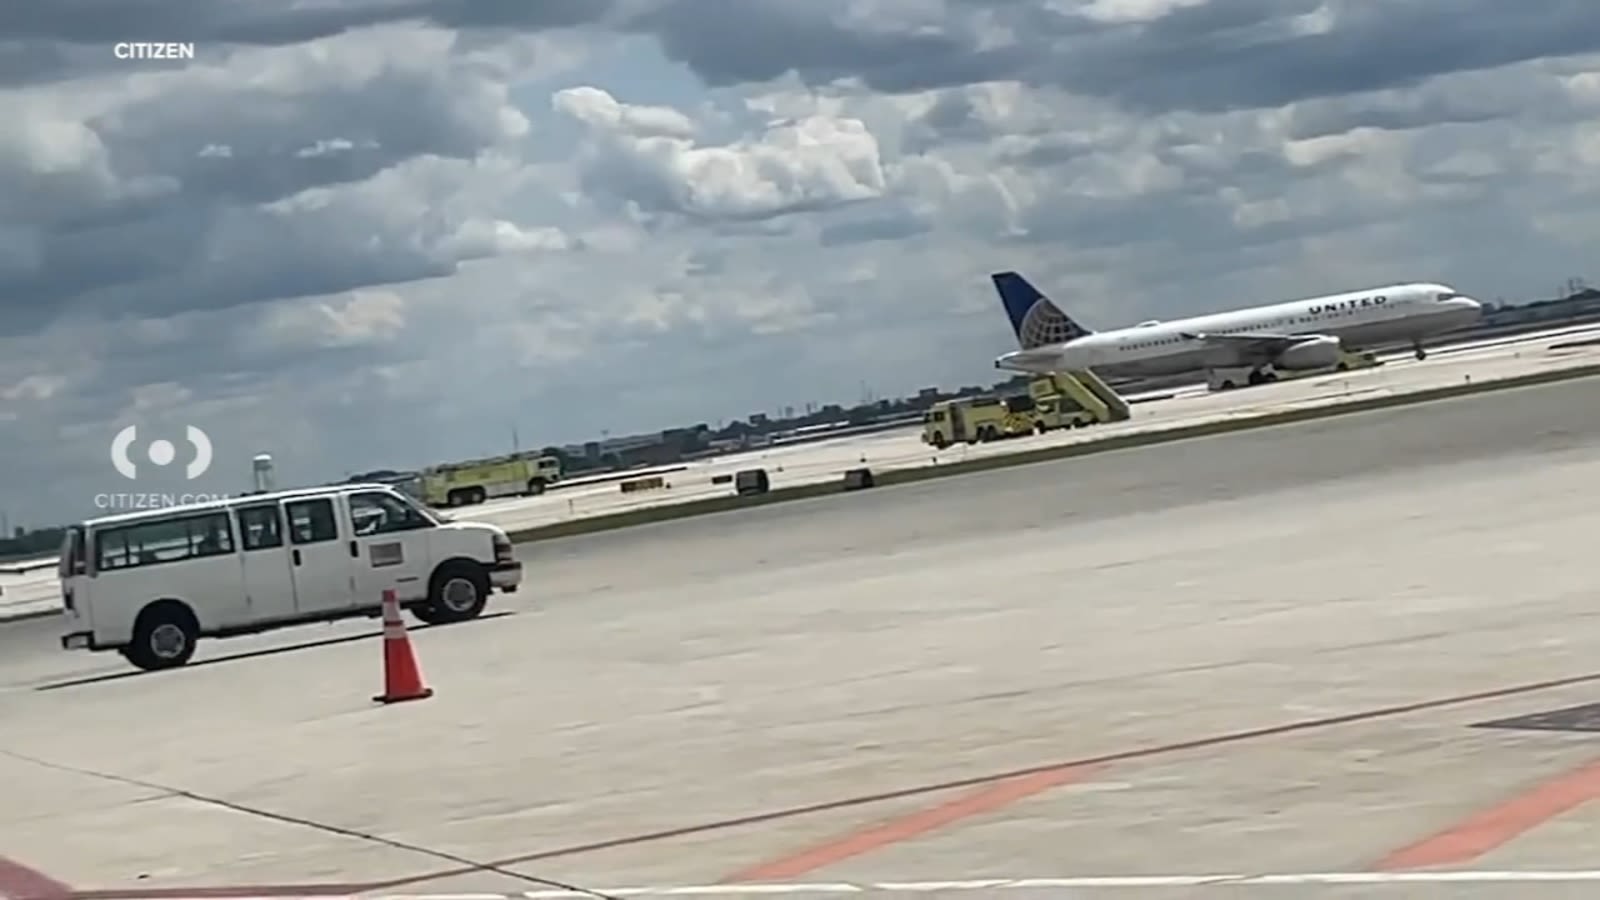 Plane engine catches fire at Chicago O'Hare Airport, FAA says